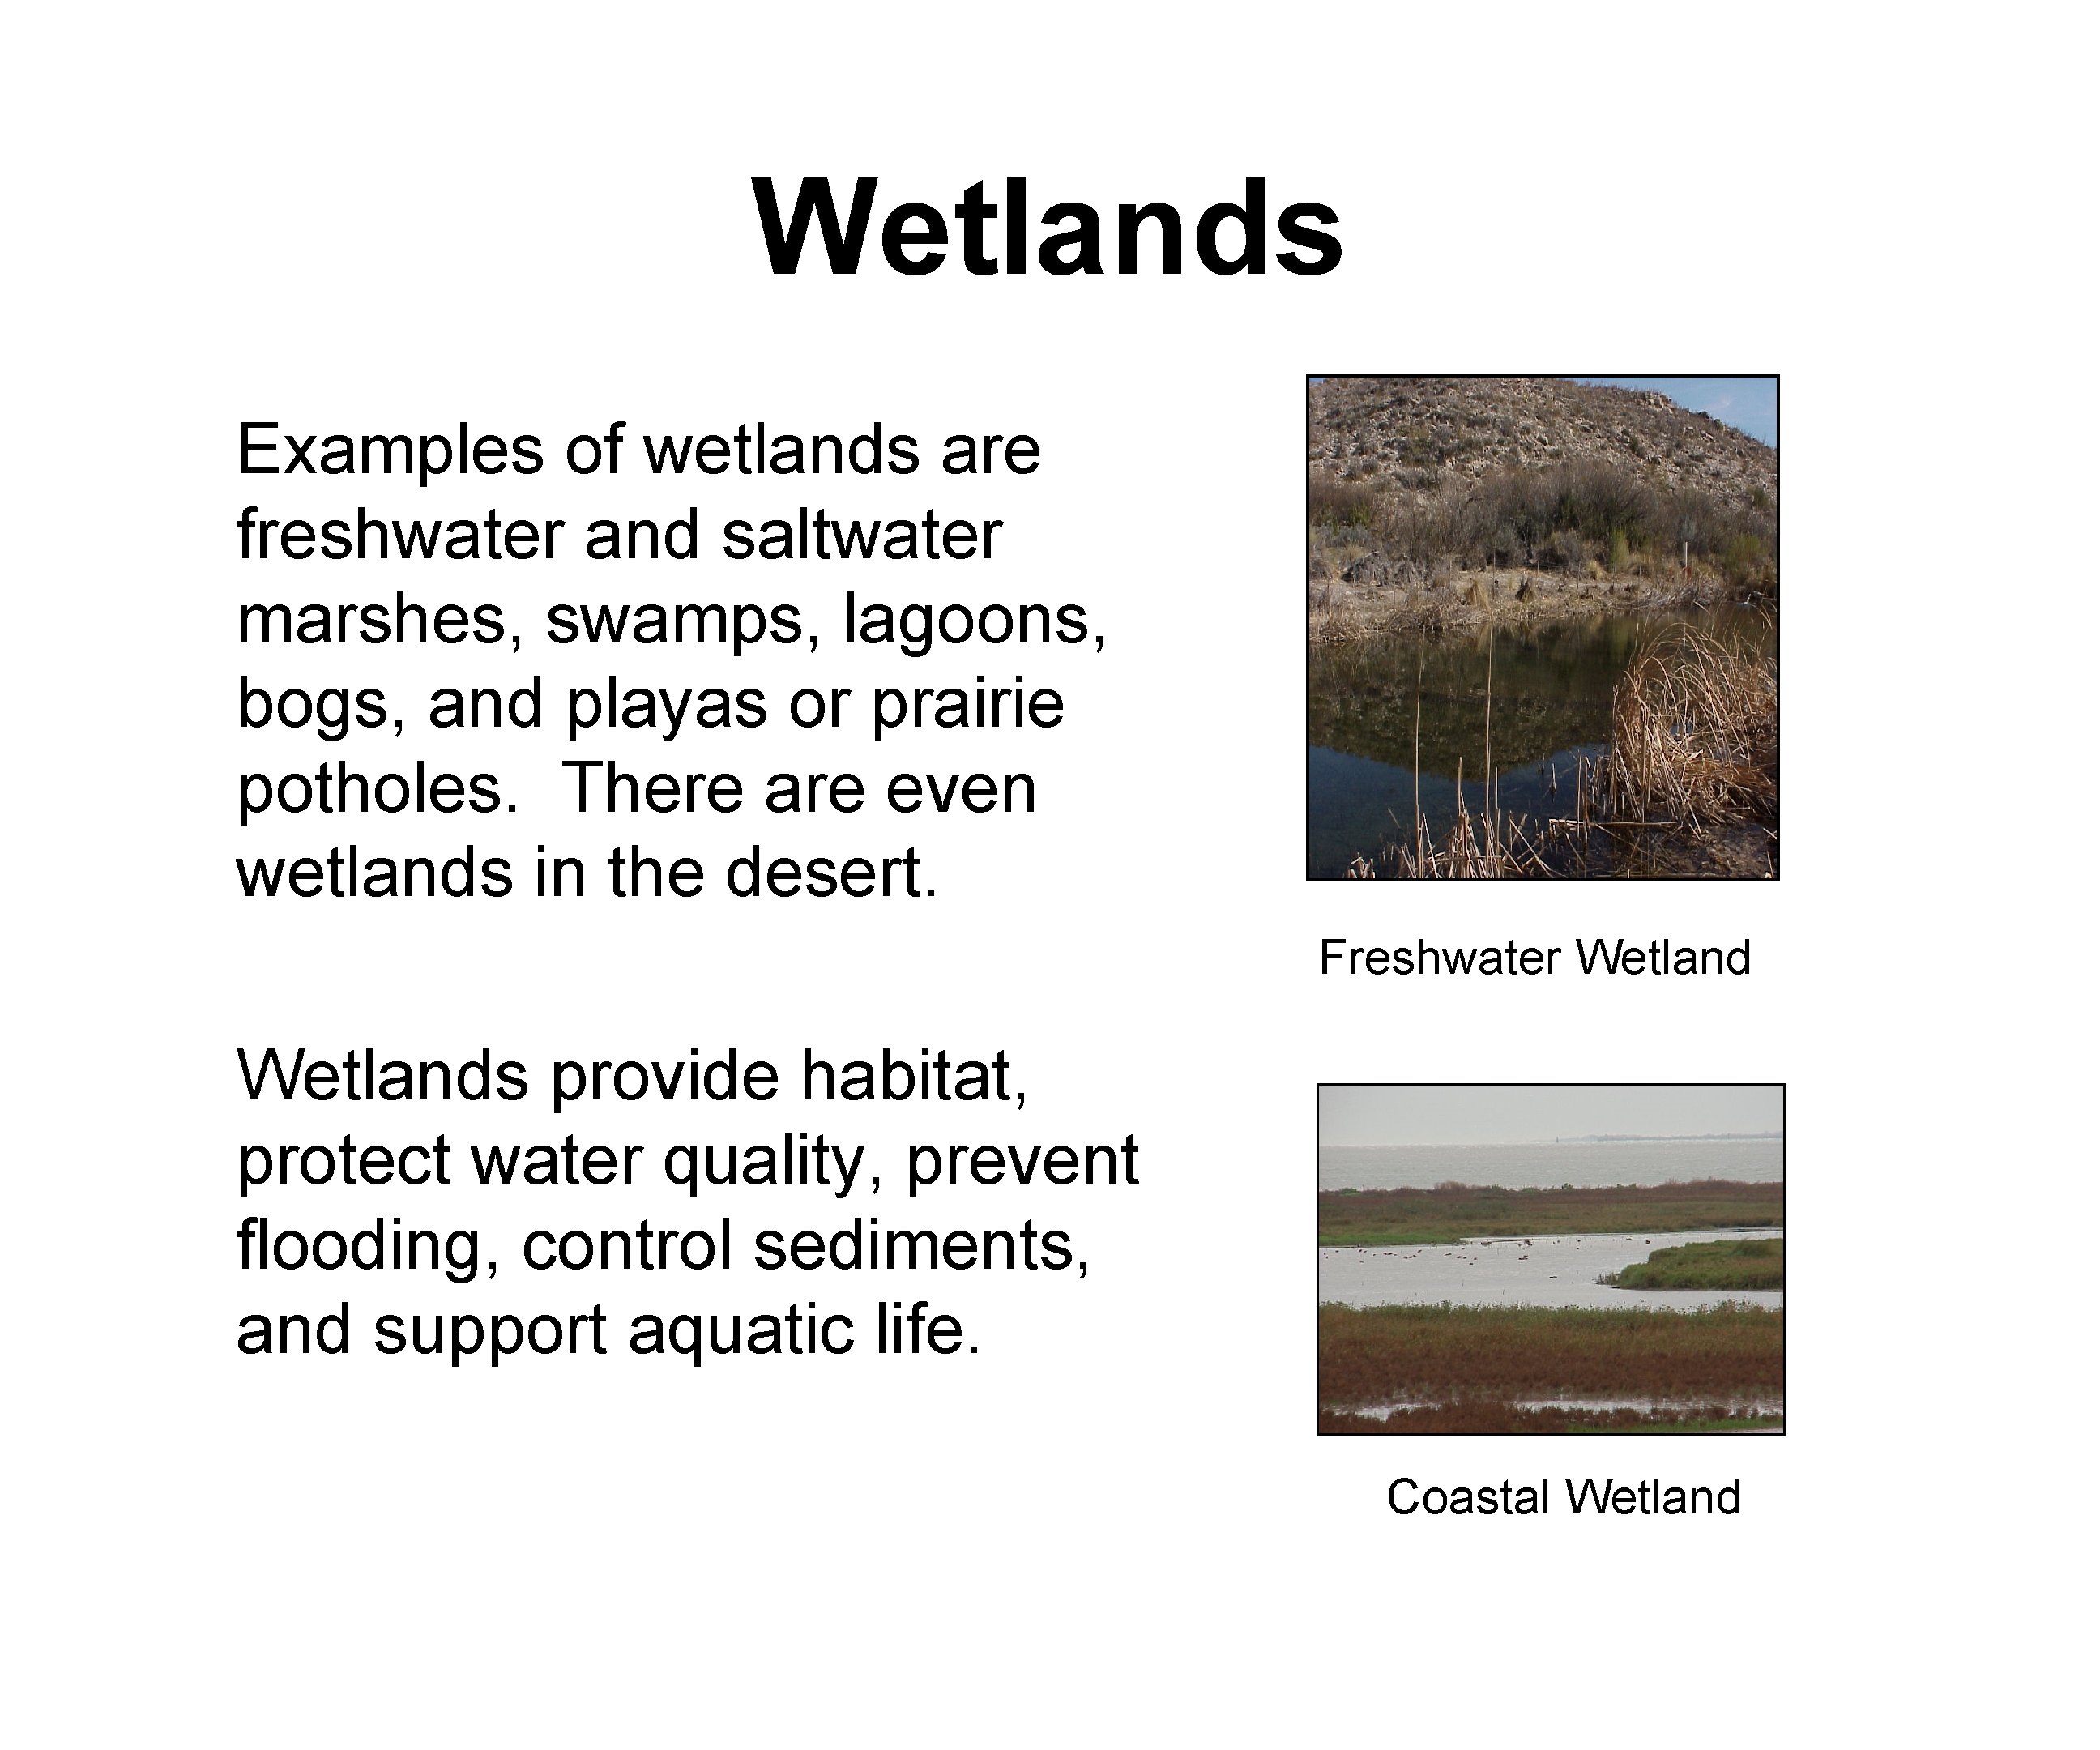 Wetlands Examples of wetlands are freshwater and saltwater marshes, swamps, lagoons, bogs, and playas